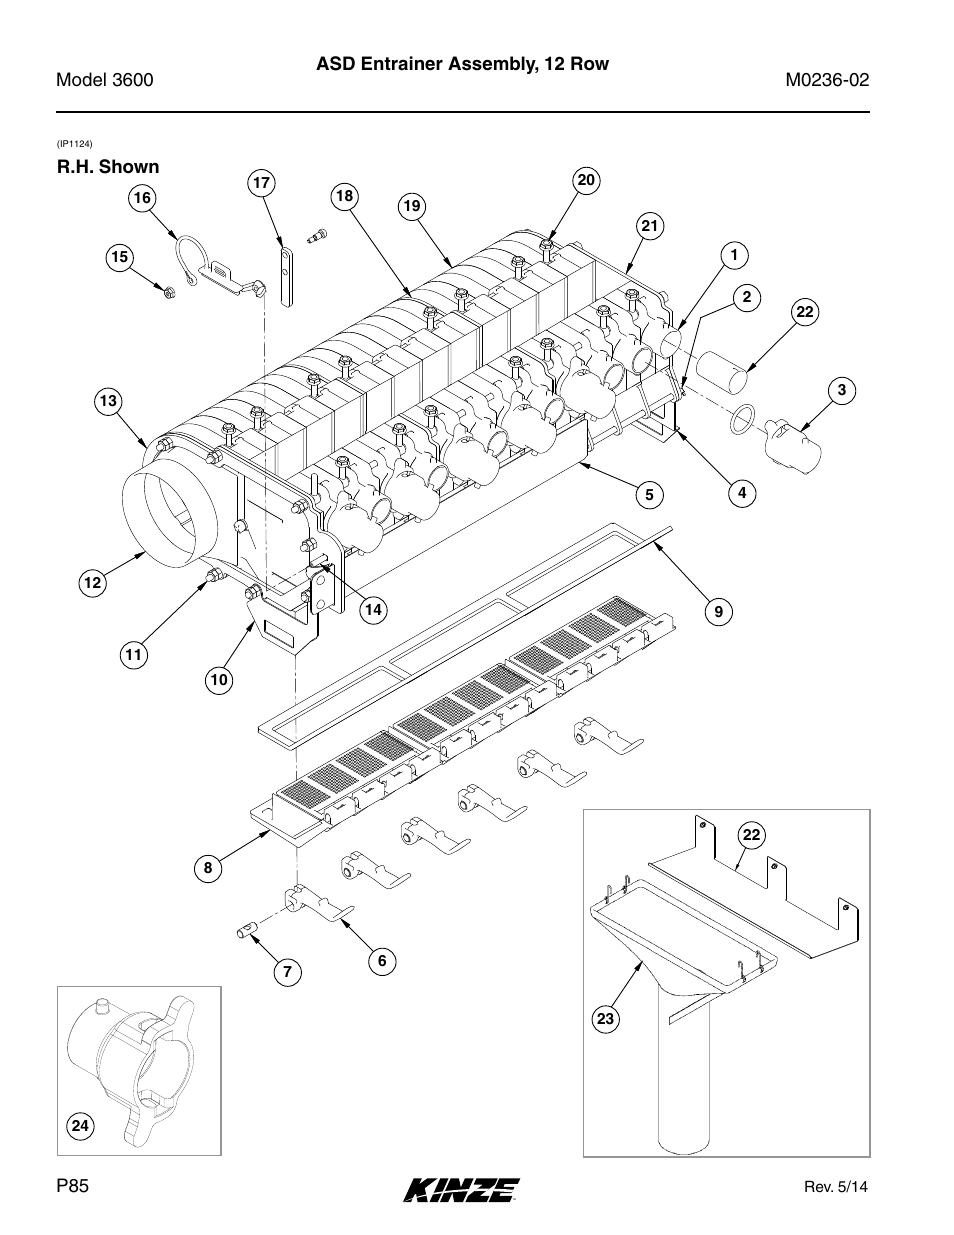 Asd entrainer assembly, 12 row, R.h. shown | Kinze 3600 Lift and Rotate Planter Rev. 5/14 User Manual | Page 88 / 302